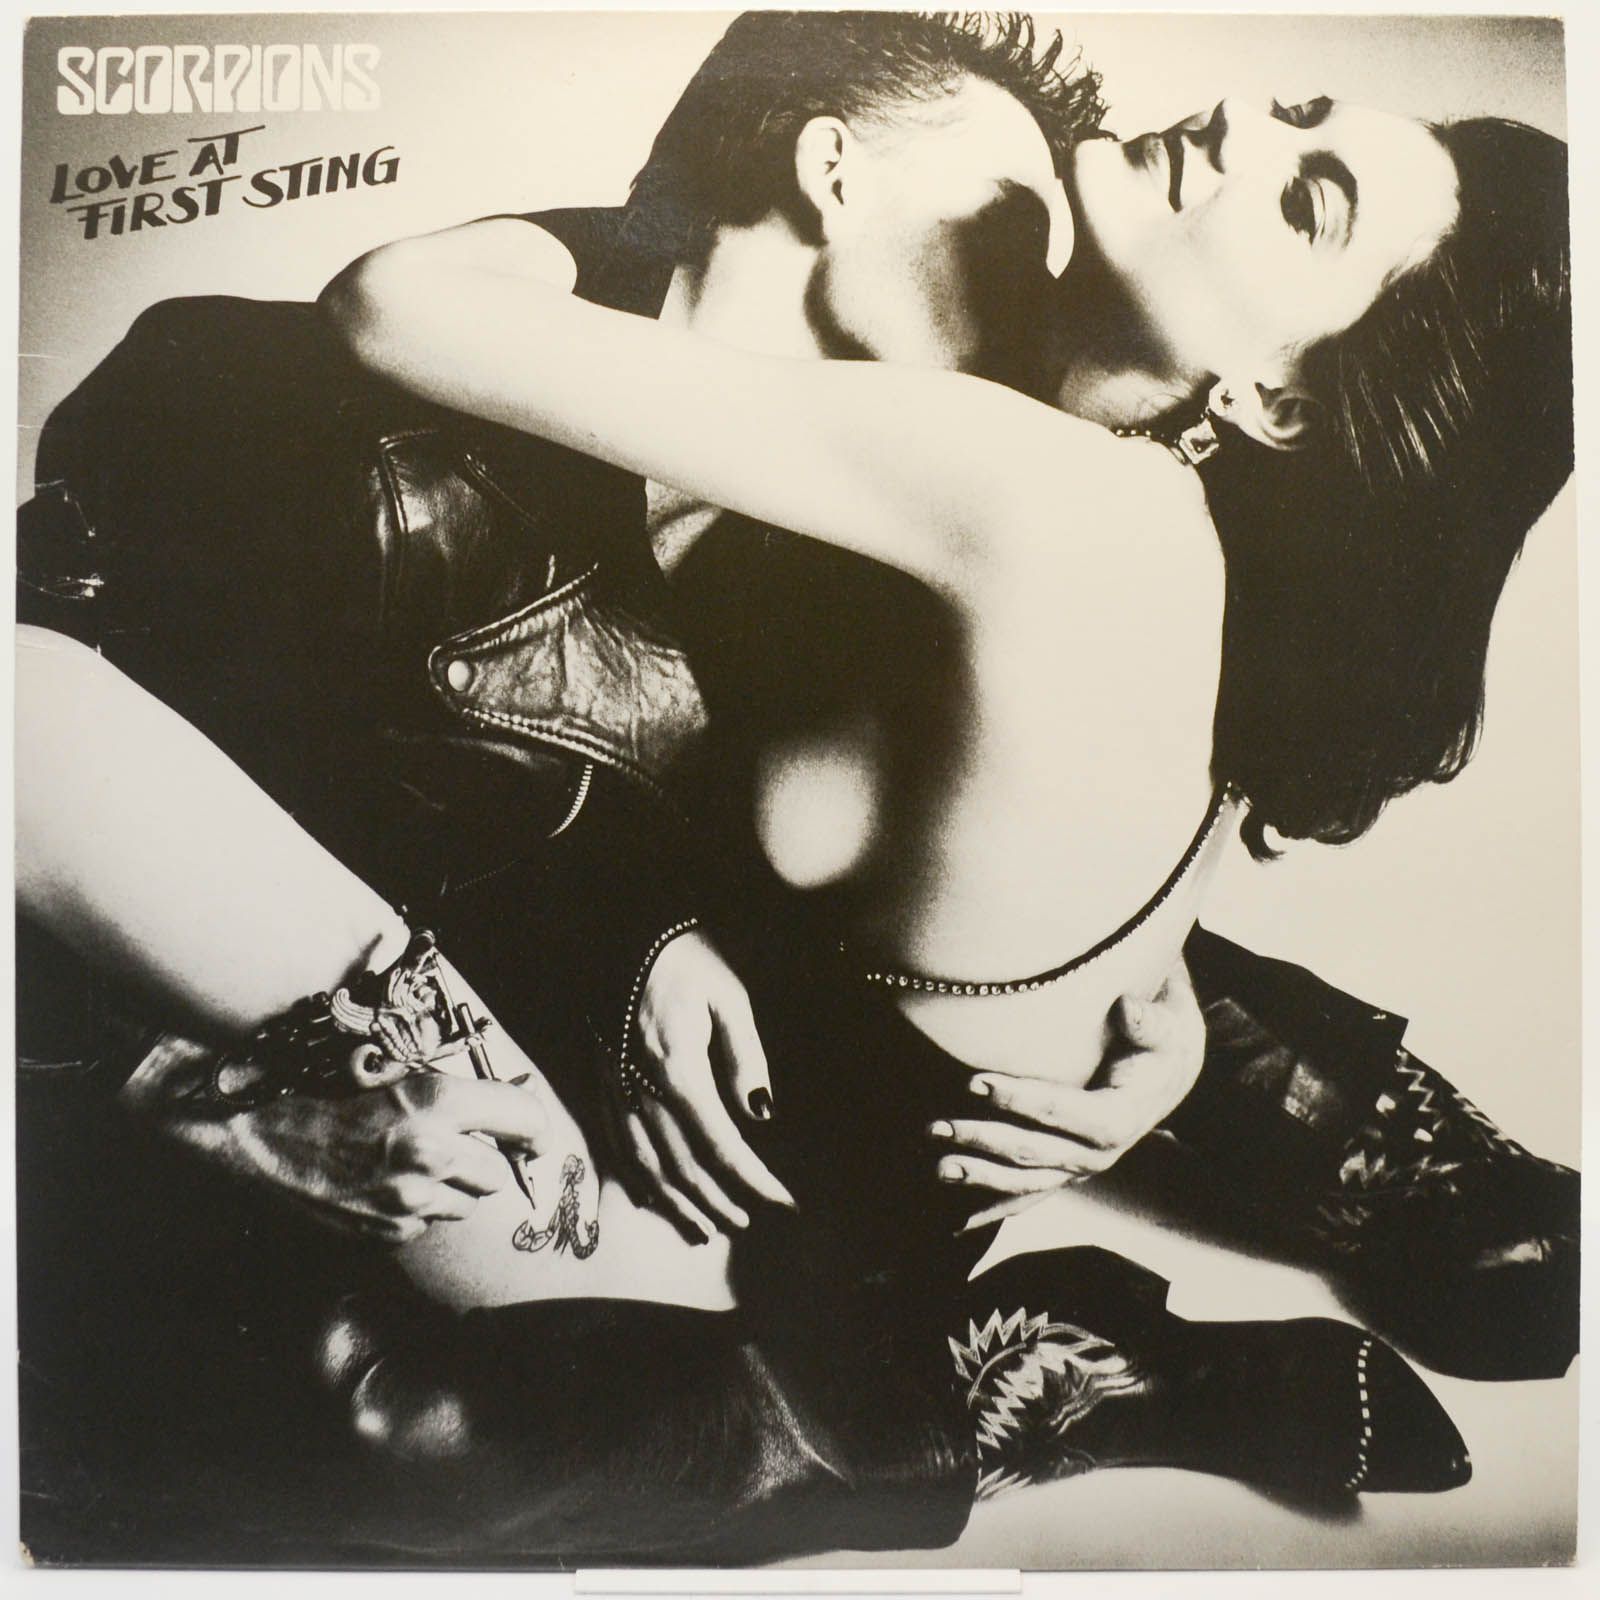 Scorpions — Love At First Sting, 1984